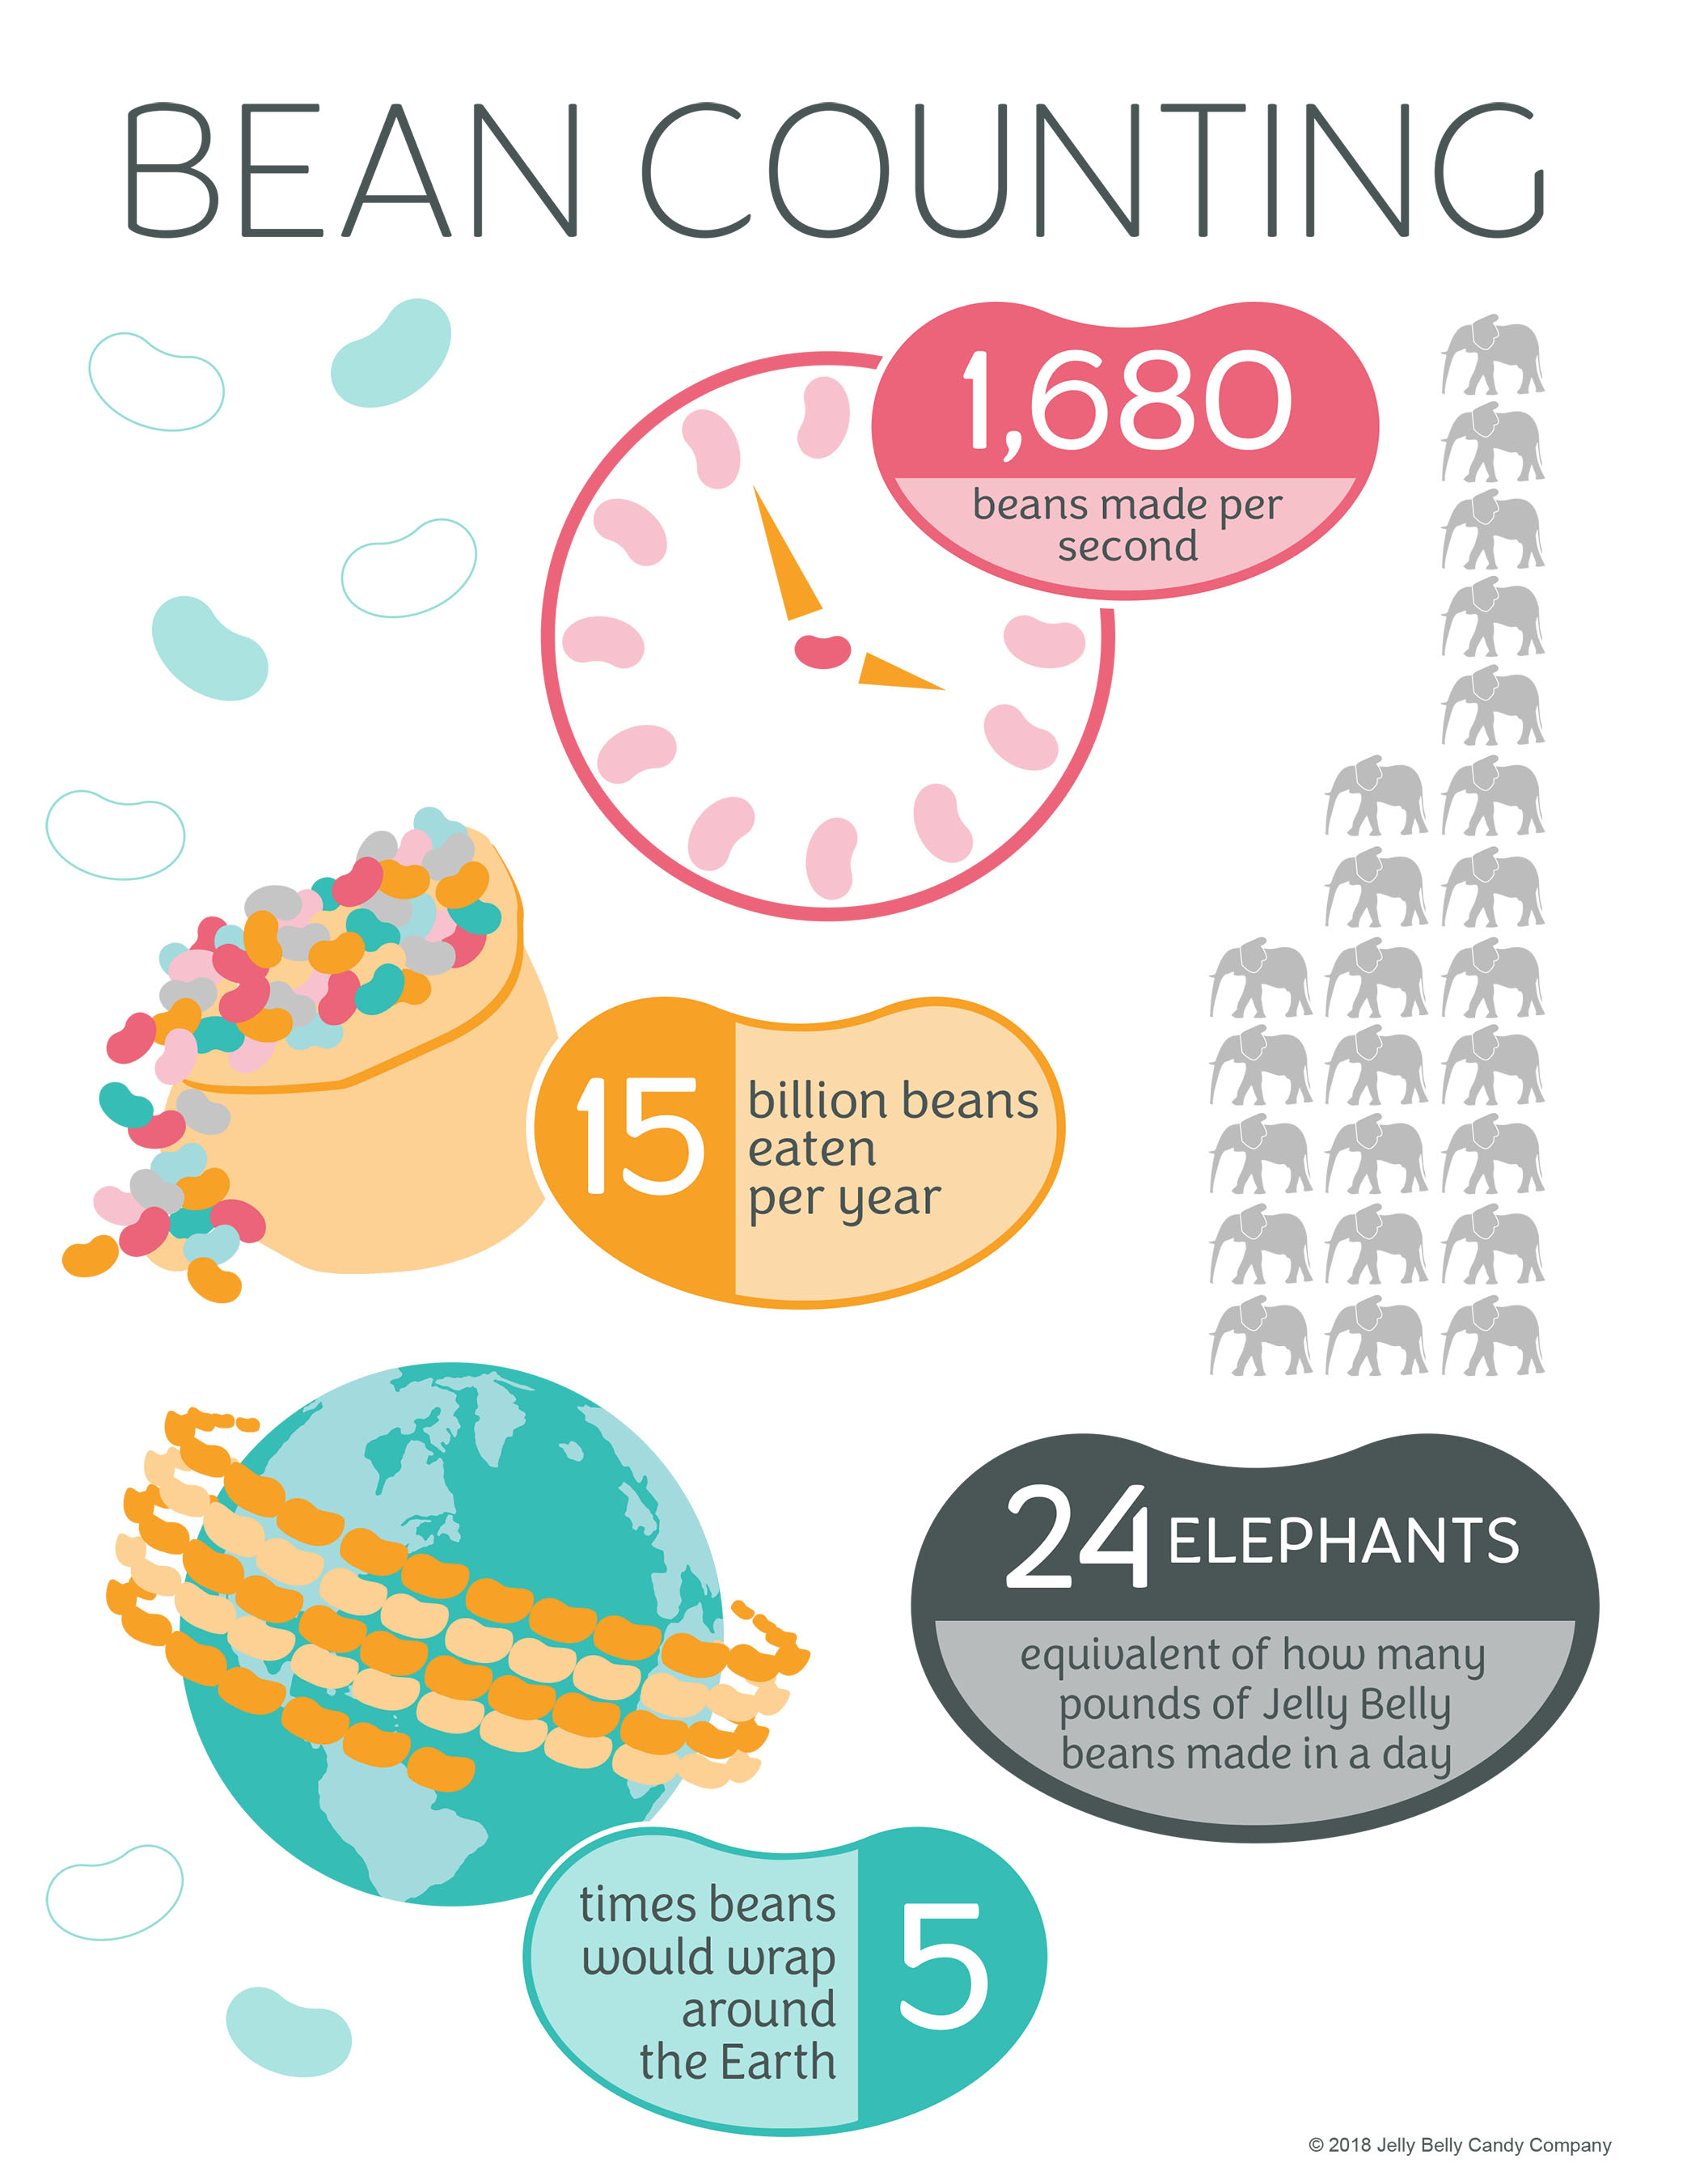 Infographic from Jelly Belly Candy Company gives a look behind the numbers of Jelly Belly jelly beans